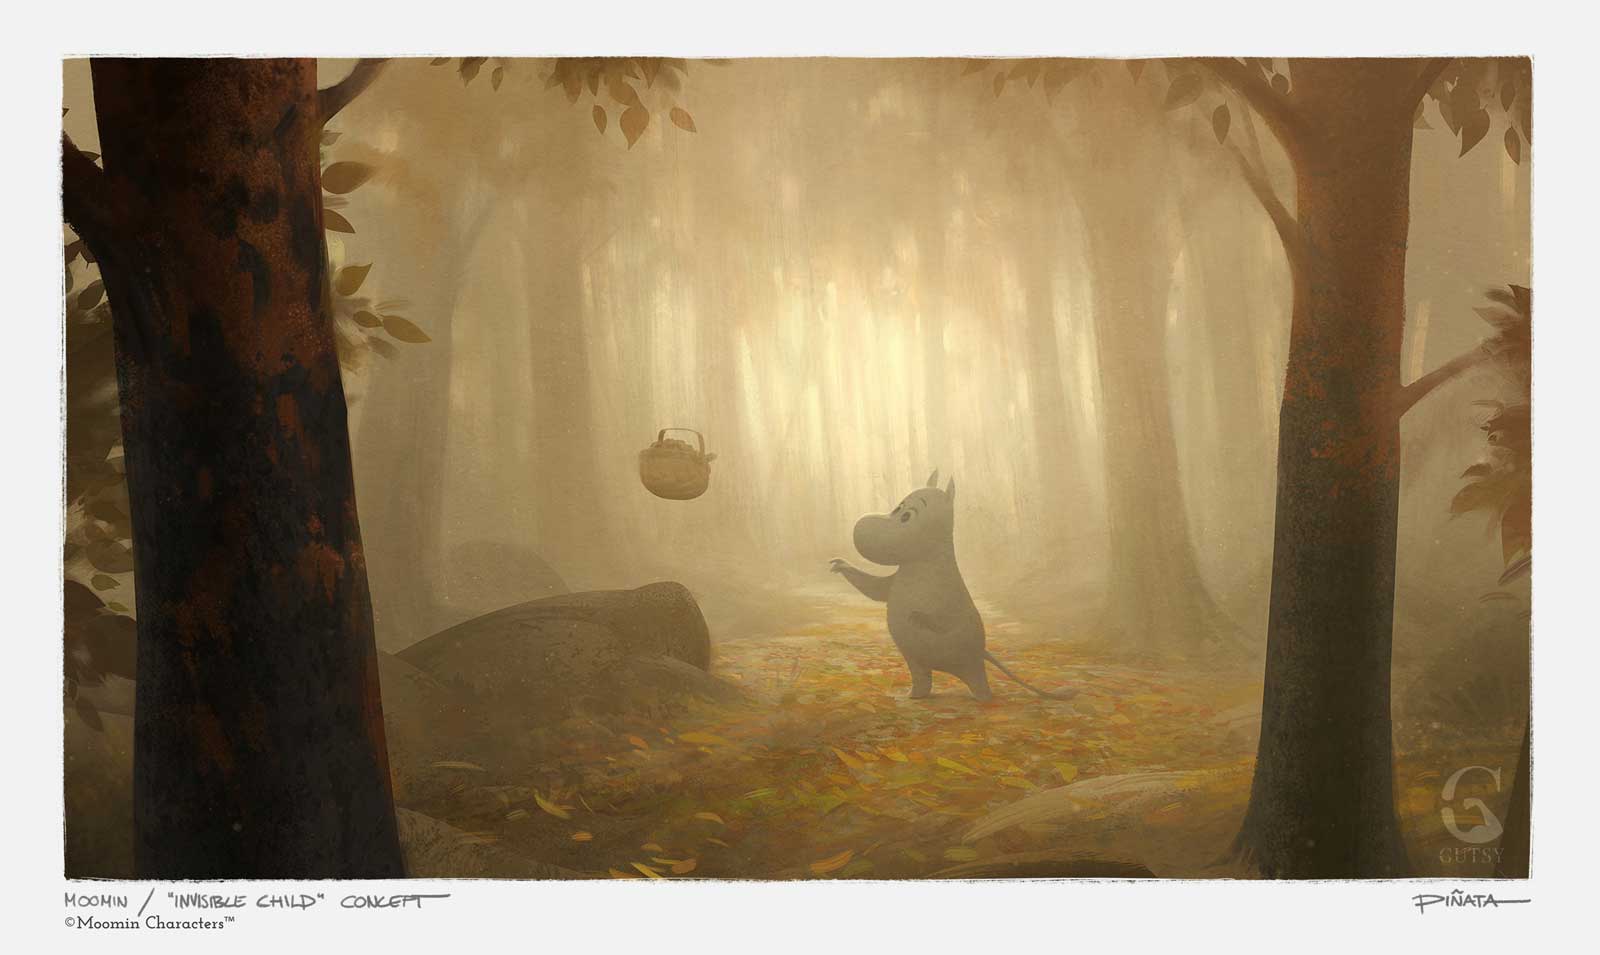 MoominValley Concept Art - The Invisible Child © Moomin Characters